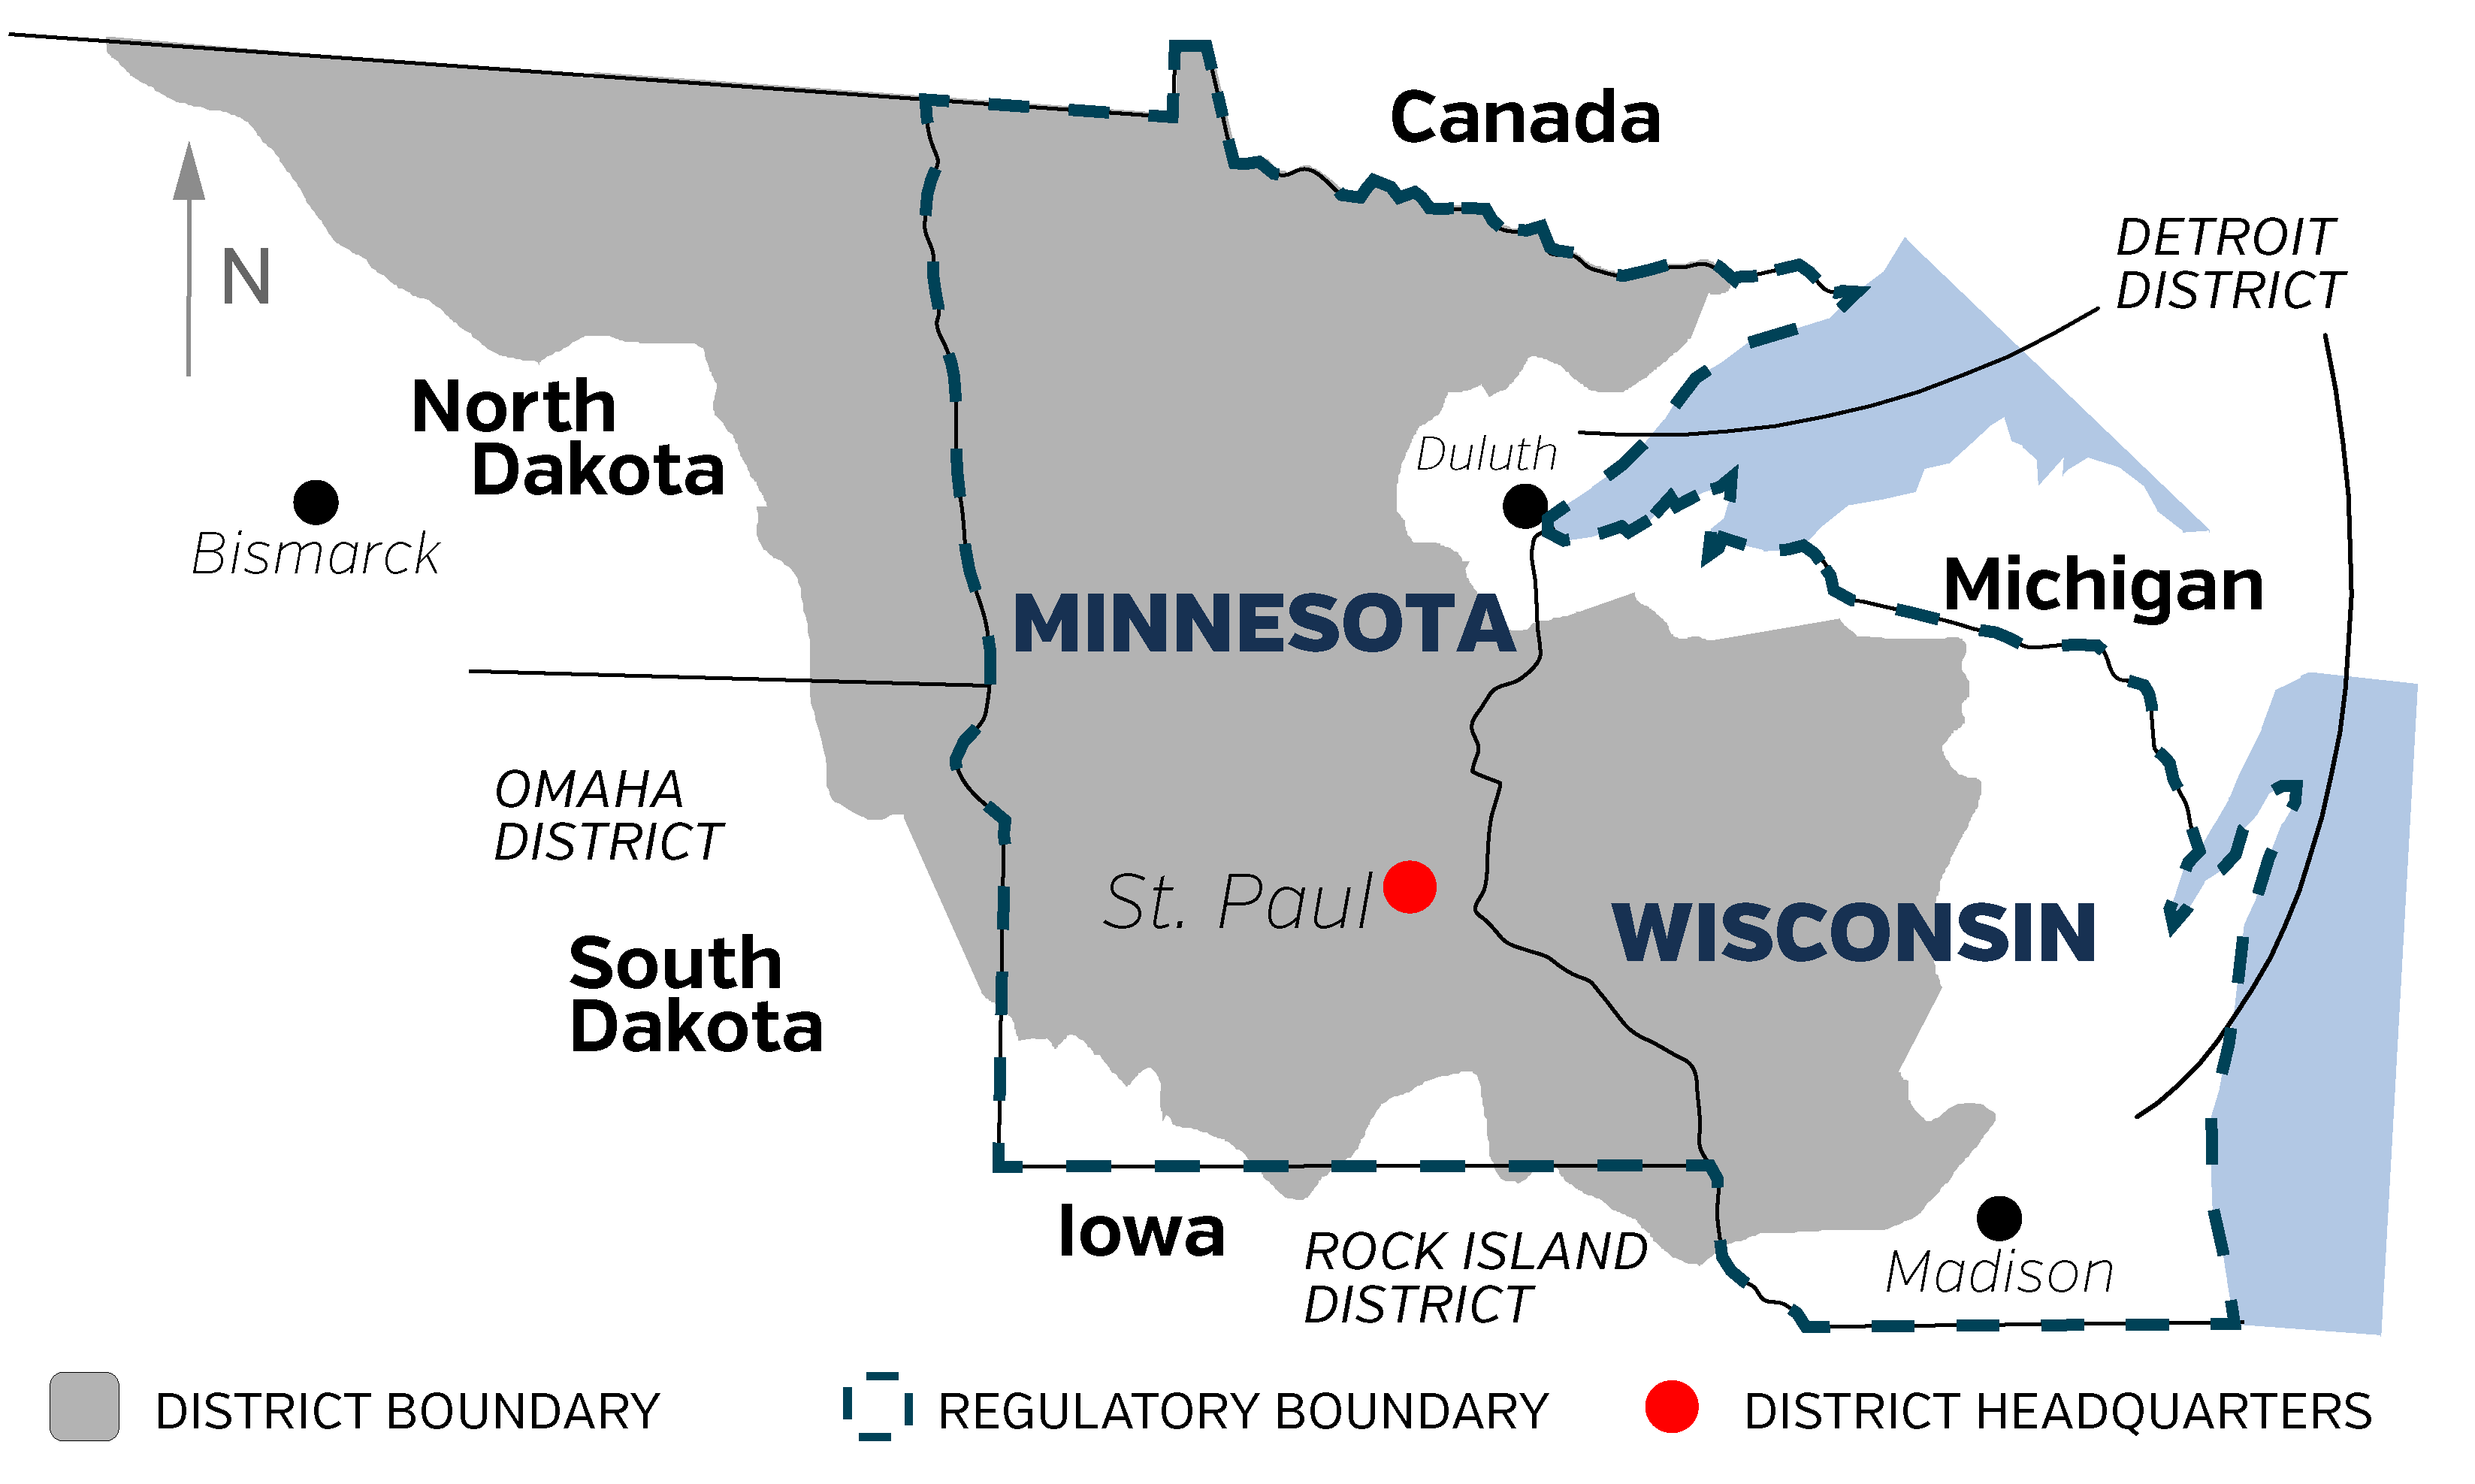 A colored map indicating the boundaries of the St. Paul District.